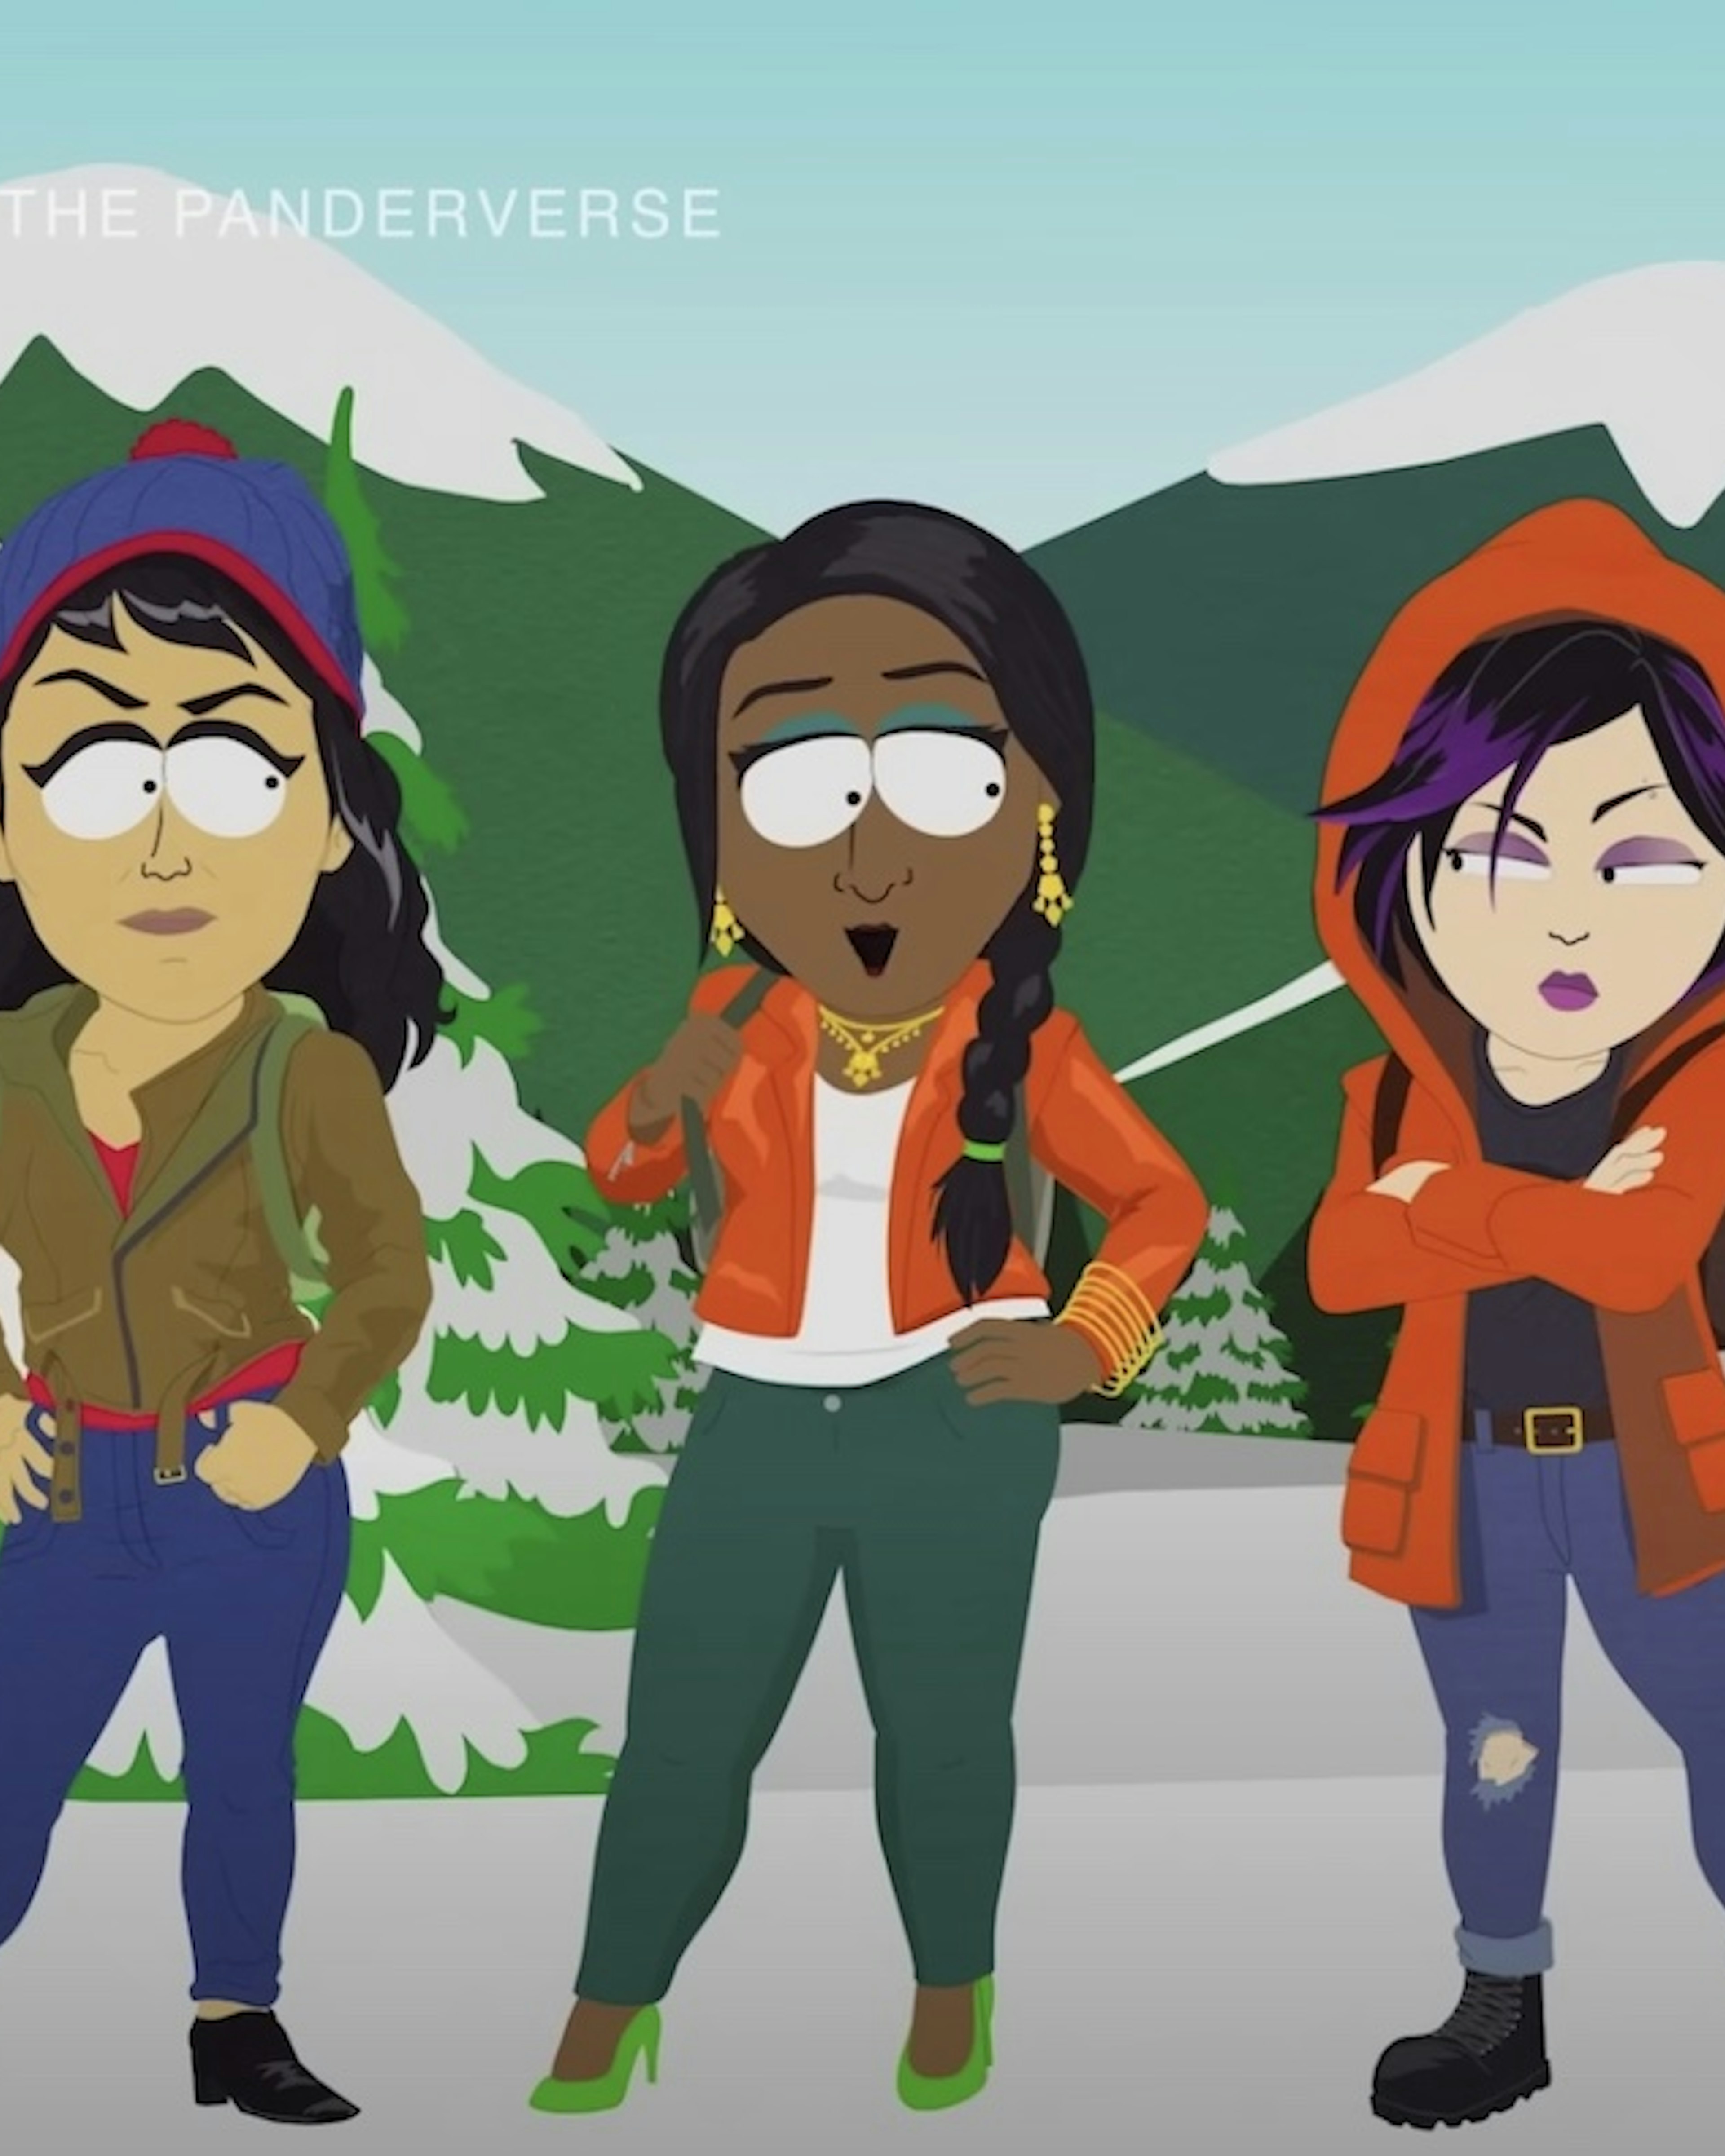 South Park: Joining The Panderverse. Paramount+.